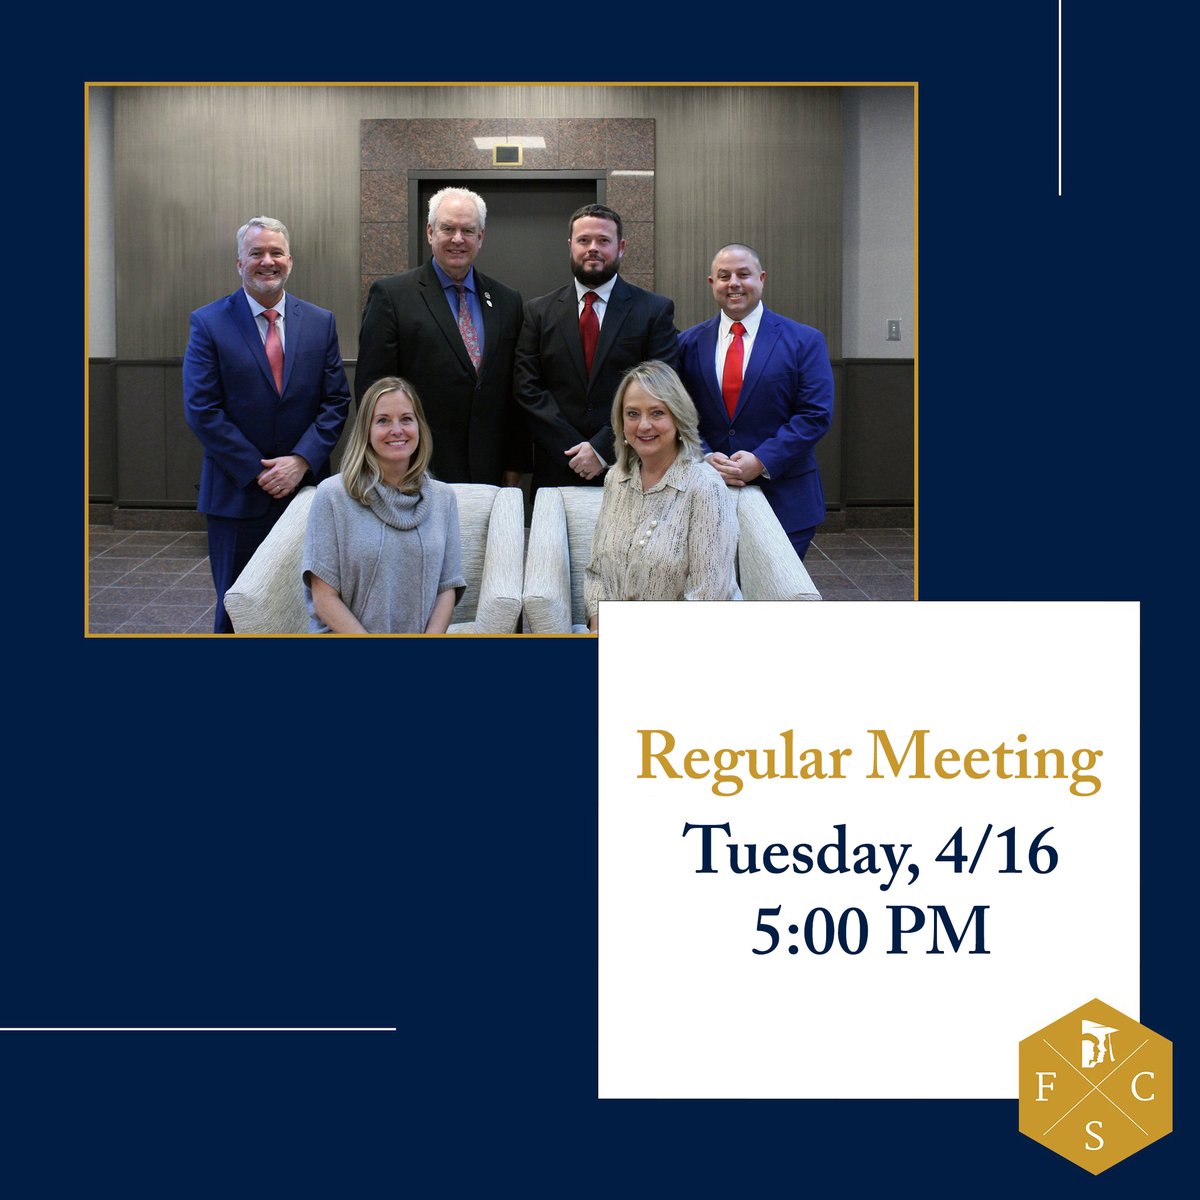 The BOE will meet for their regular April meeting on Tuesday 4/16 at 5 pm. View the agenda at ow.ly/8z6r50Rfov2